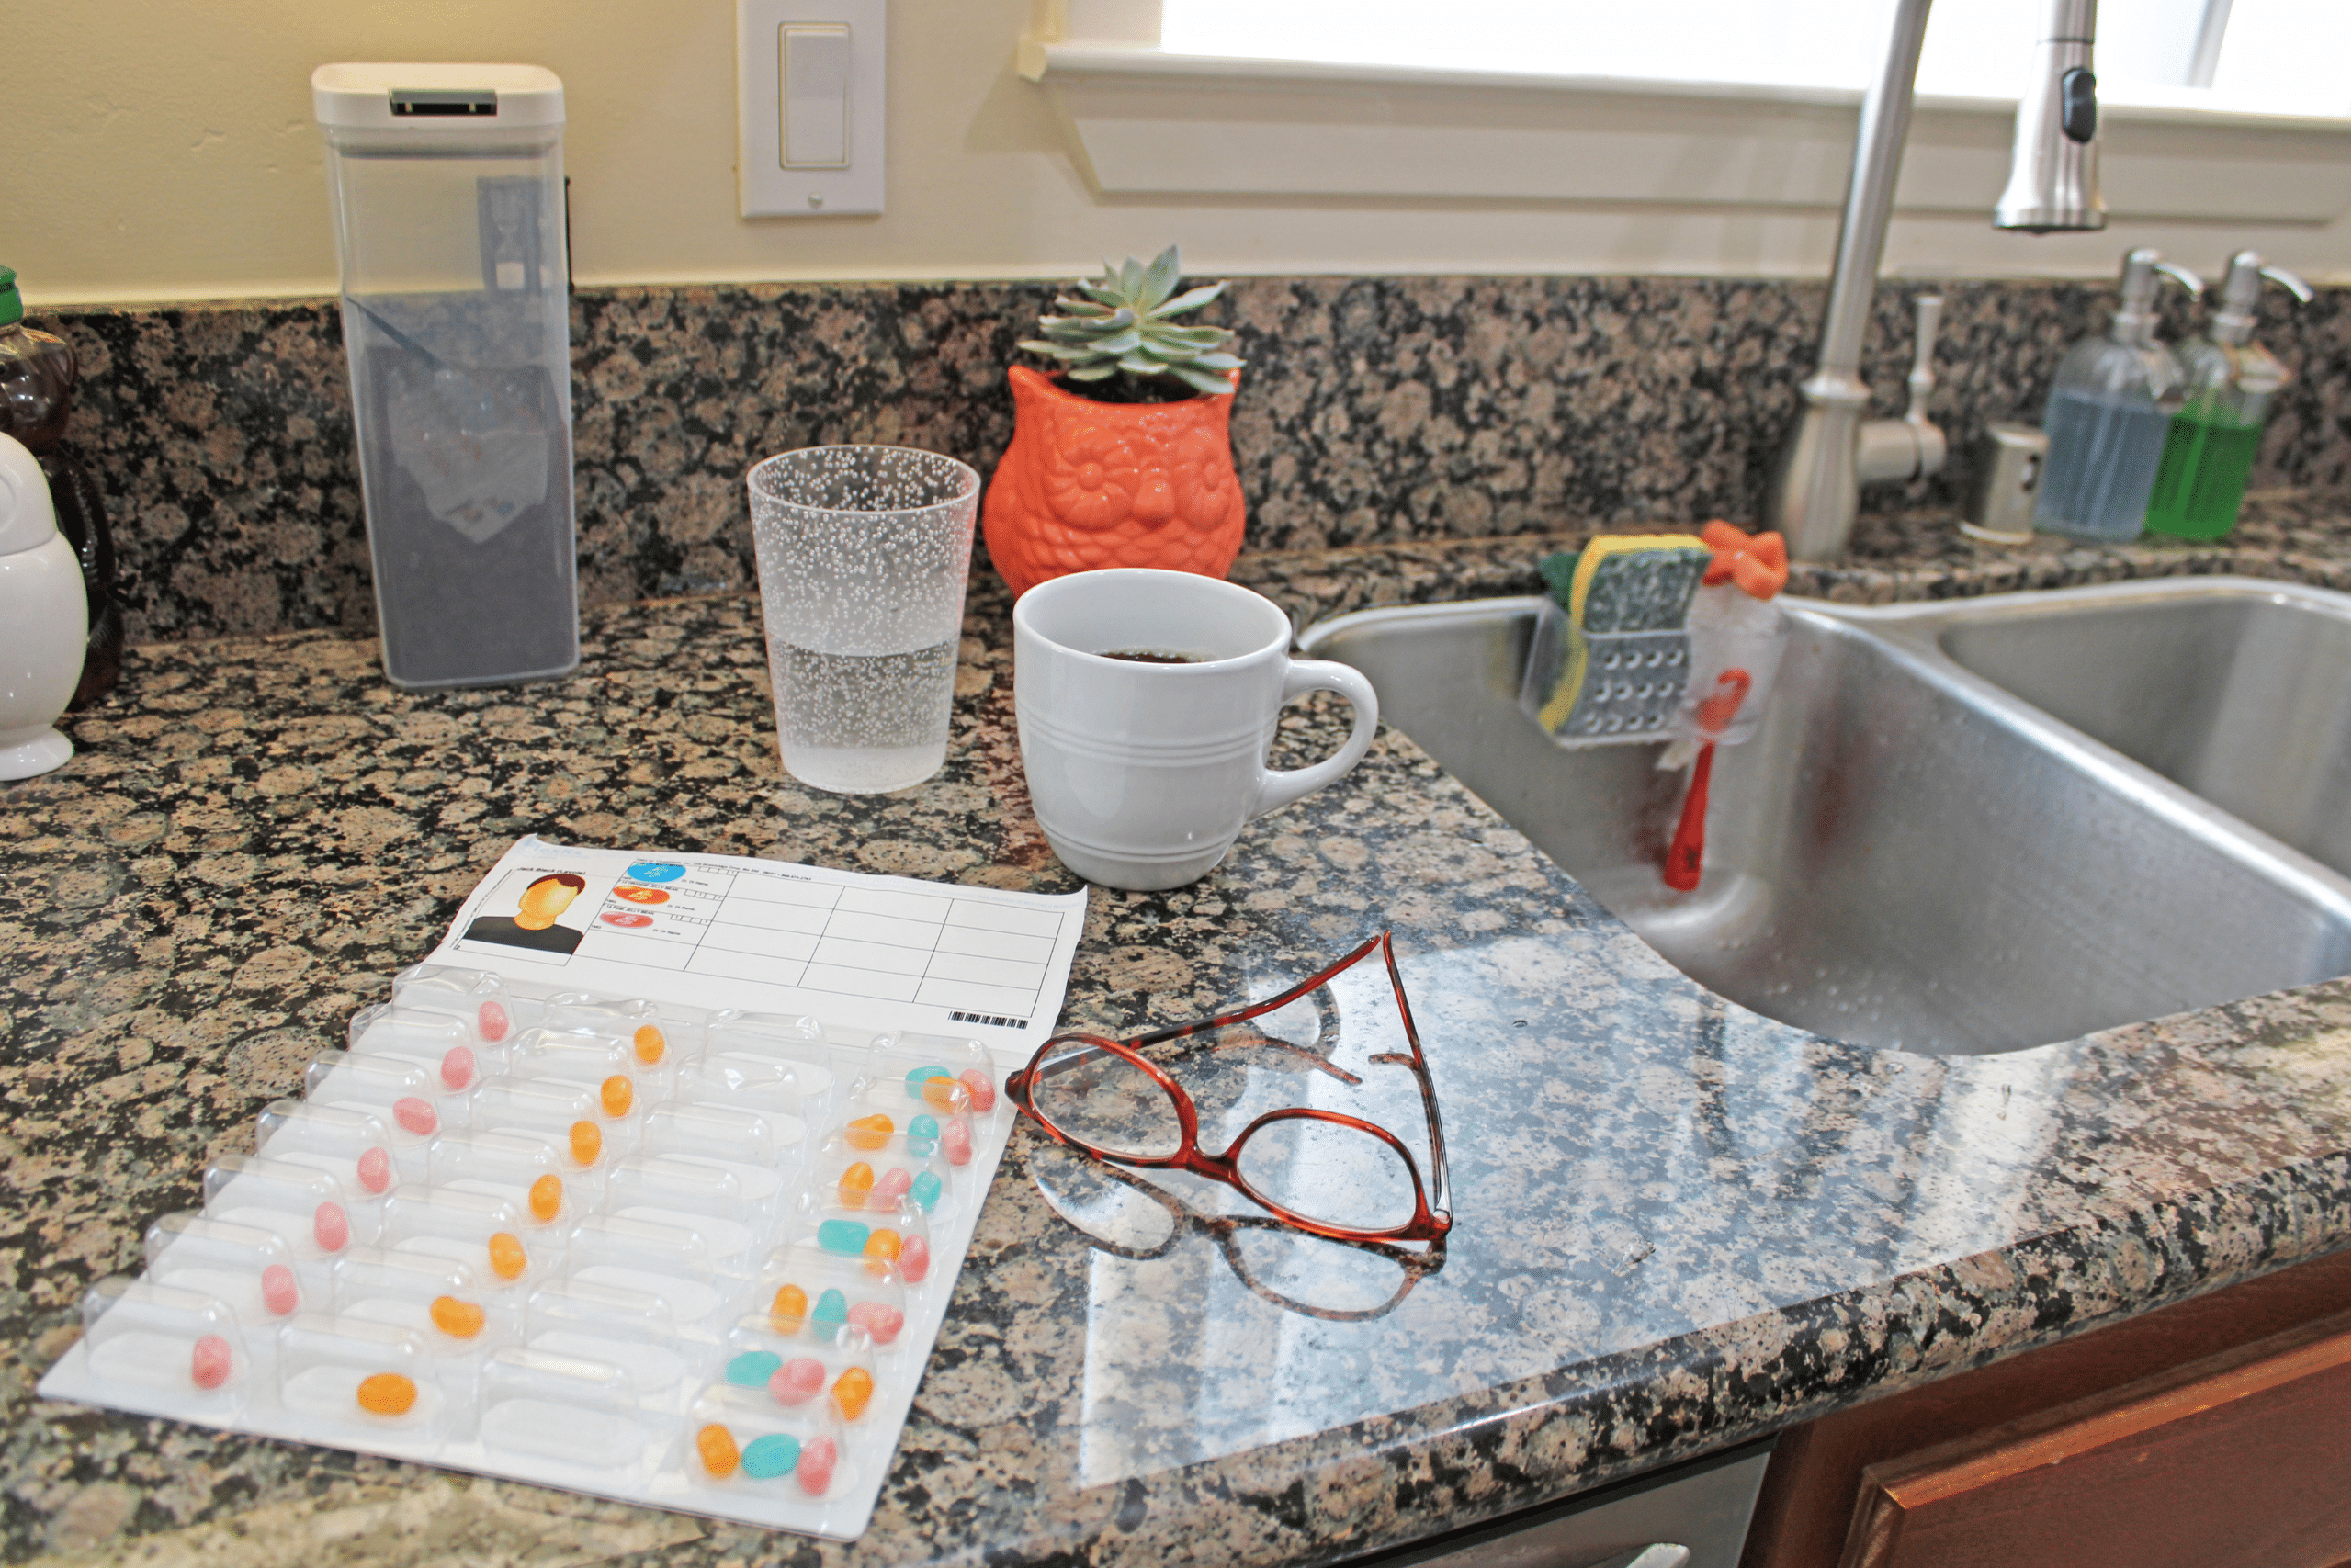 This is an example of a Medication Adhere Card (MAC) in a home setting, using candy to represent the different medications.